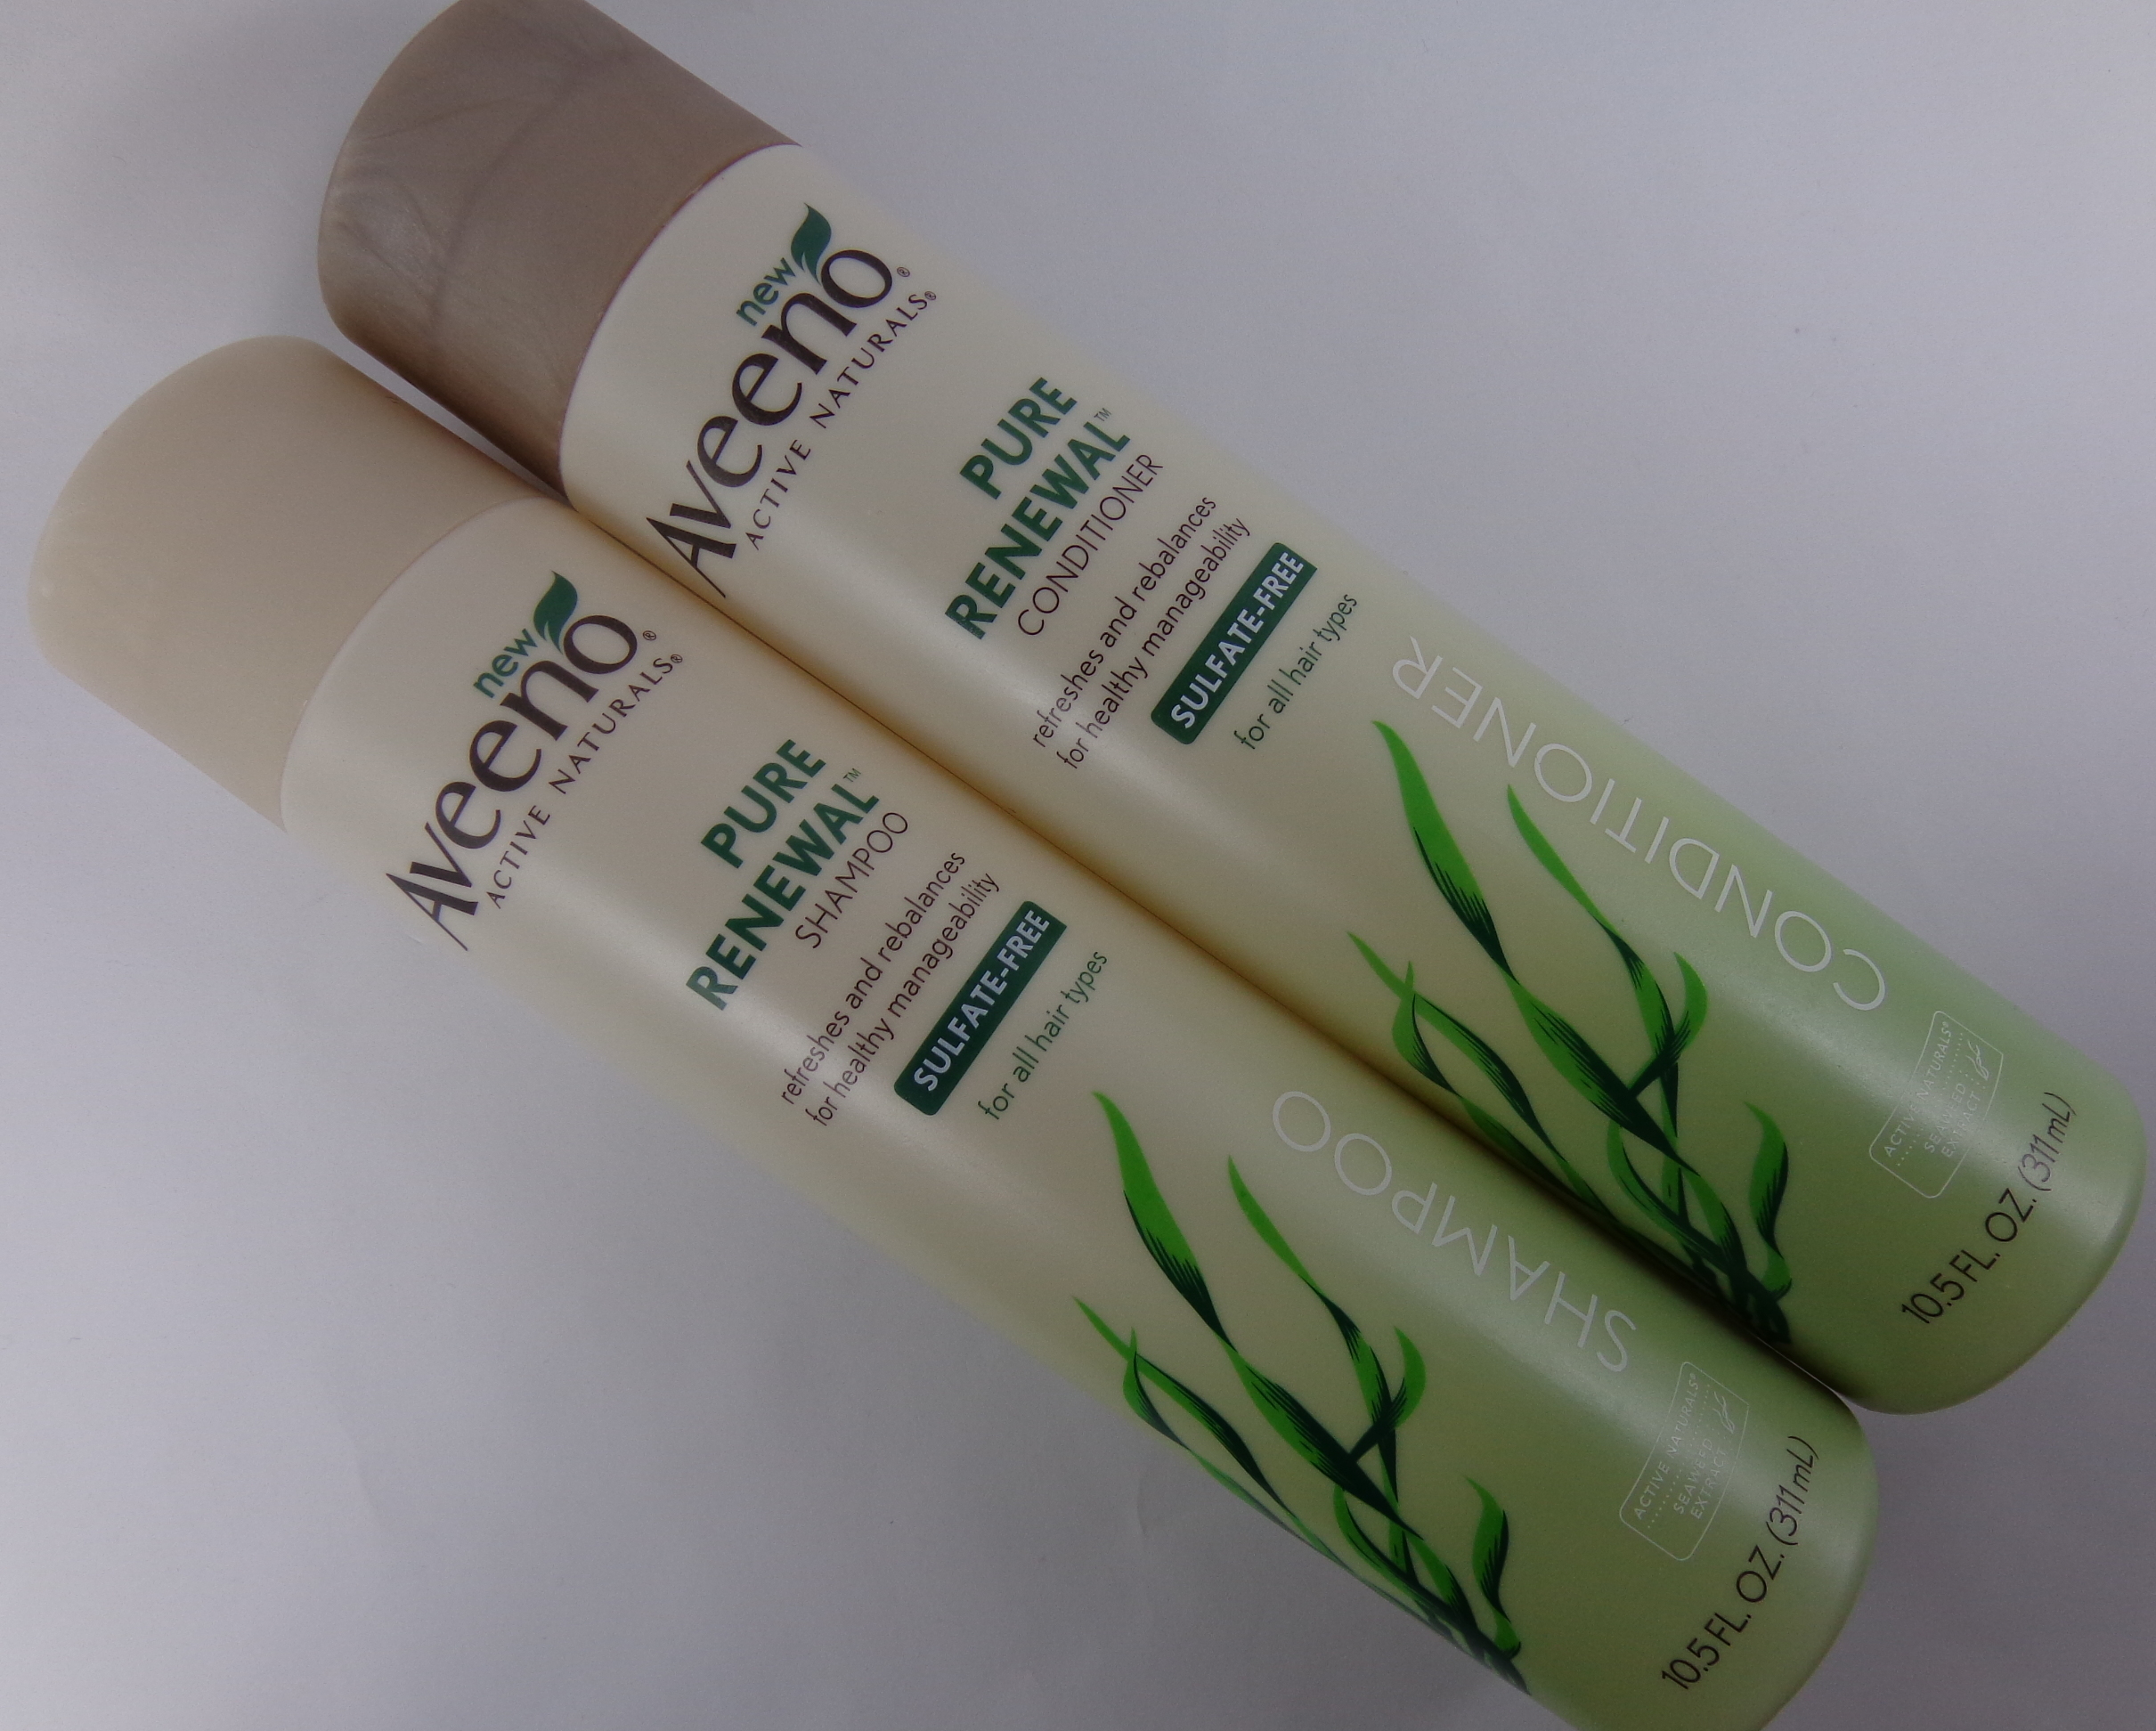 har taget fejl Stol person Review: Aveeno Pure Renewal Shampoo & Conditioner - My Highest Self